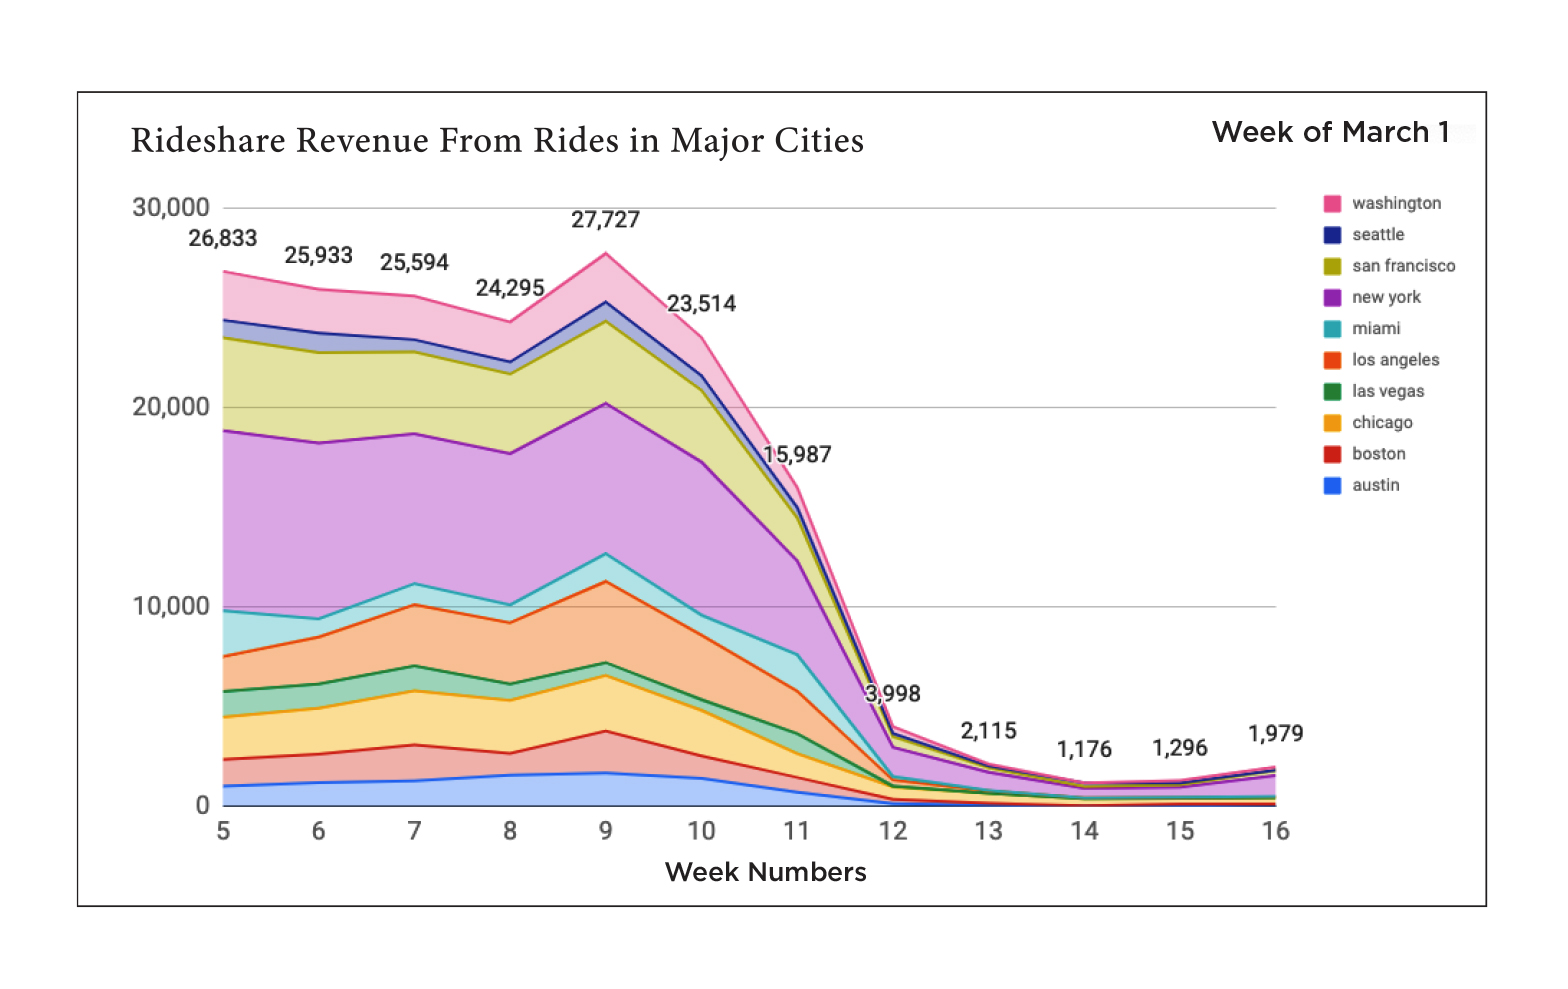 Chart showing Rideshare Revenue from Rides in Major Cities